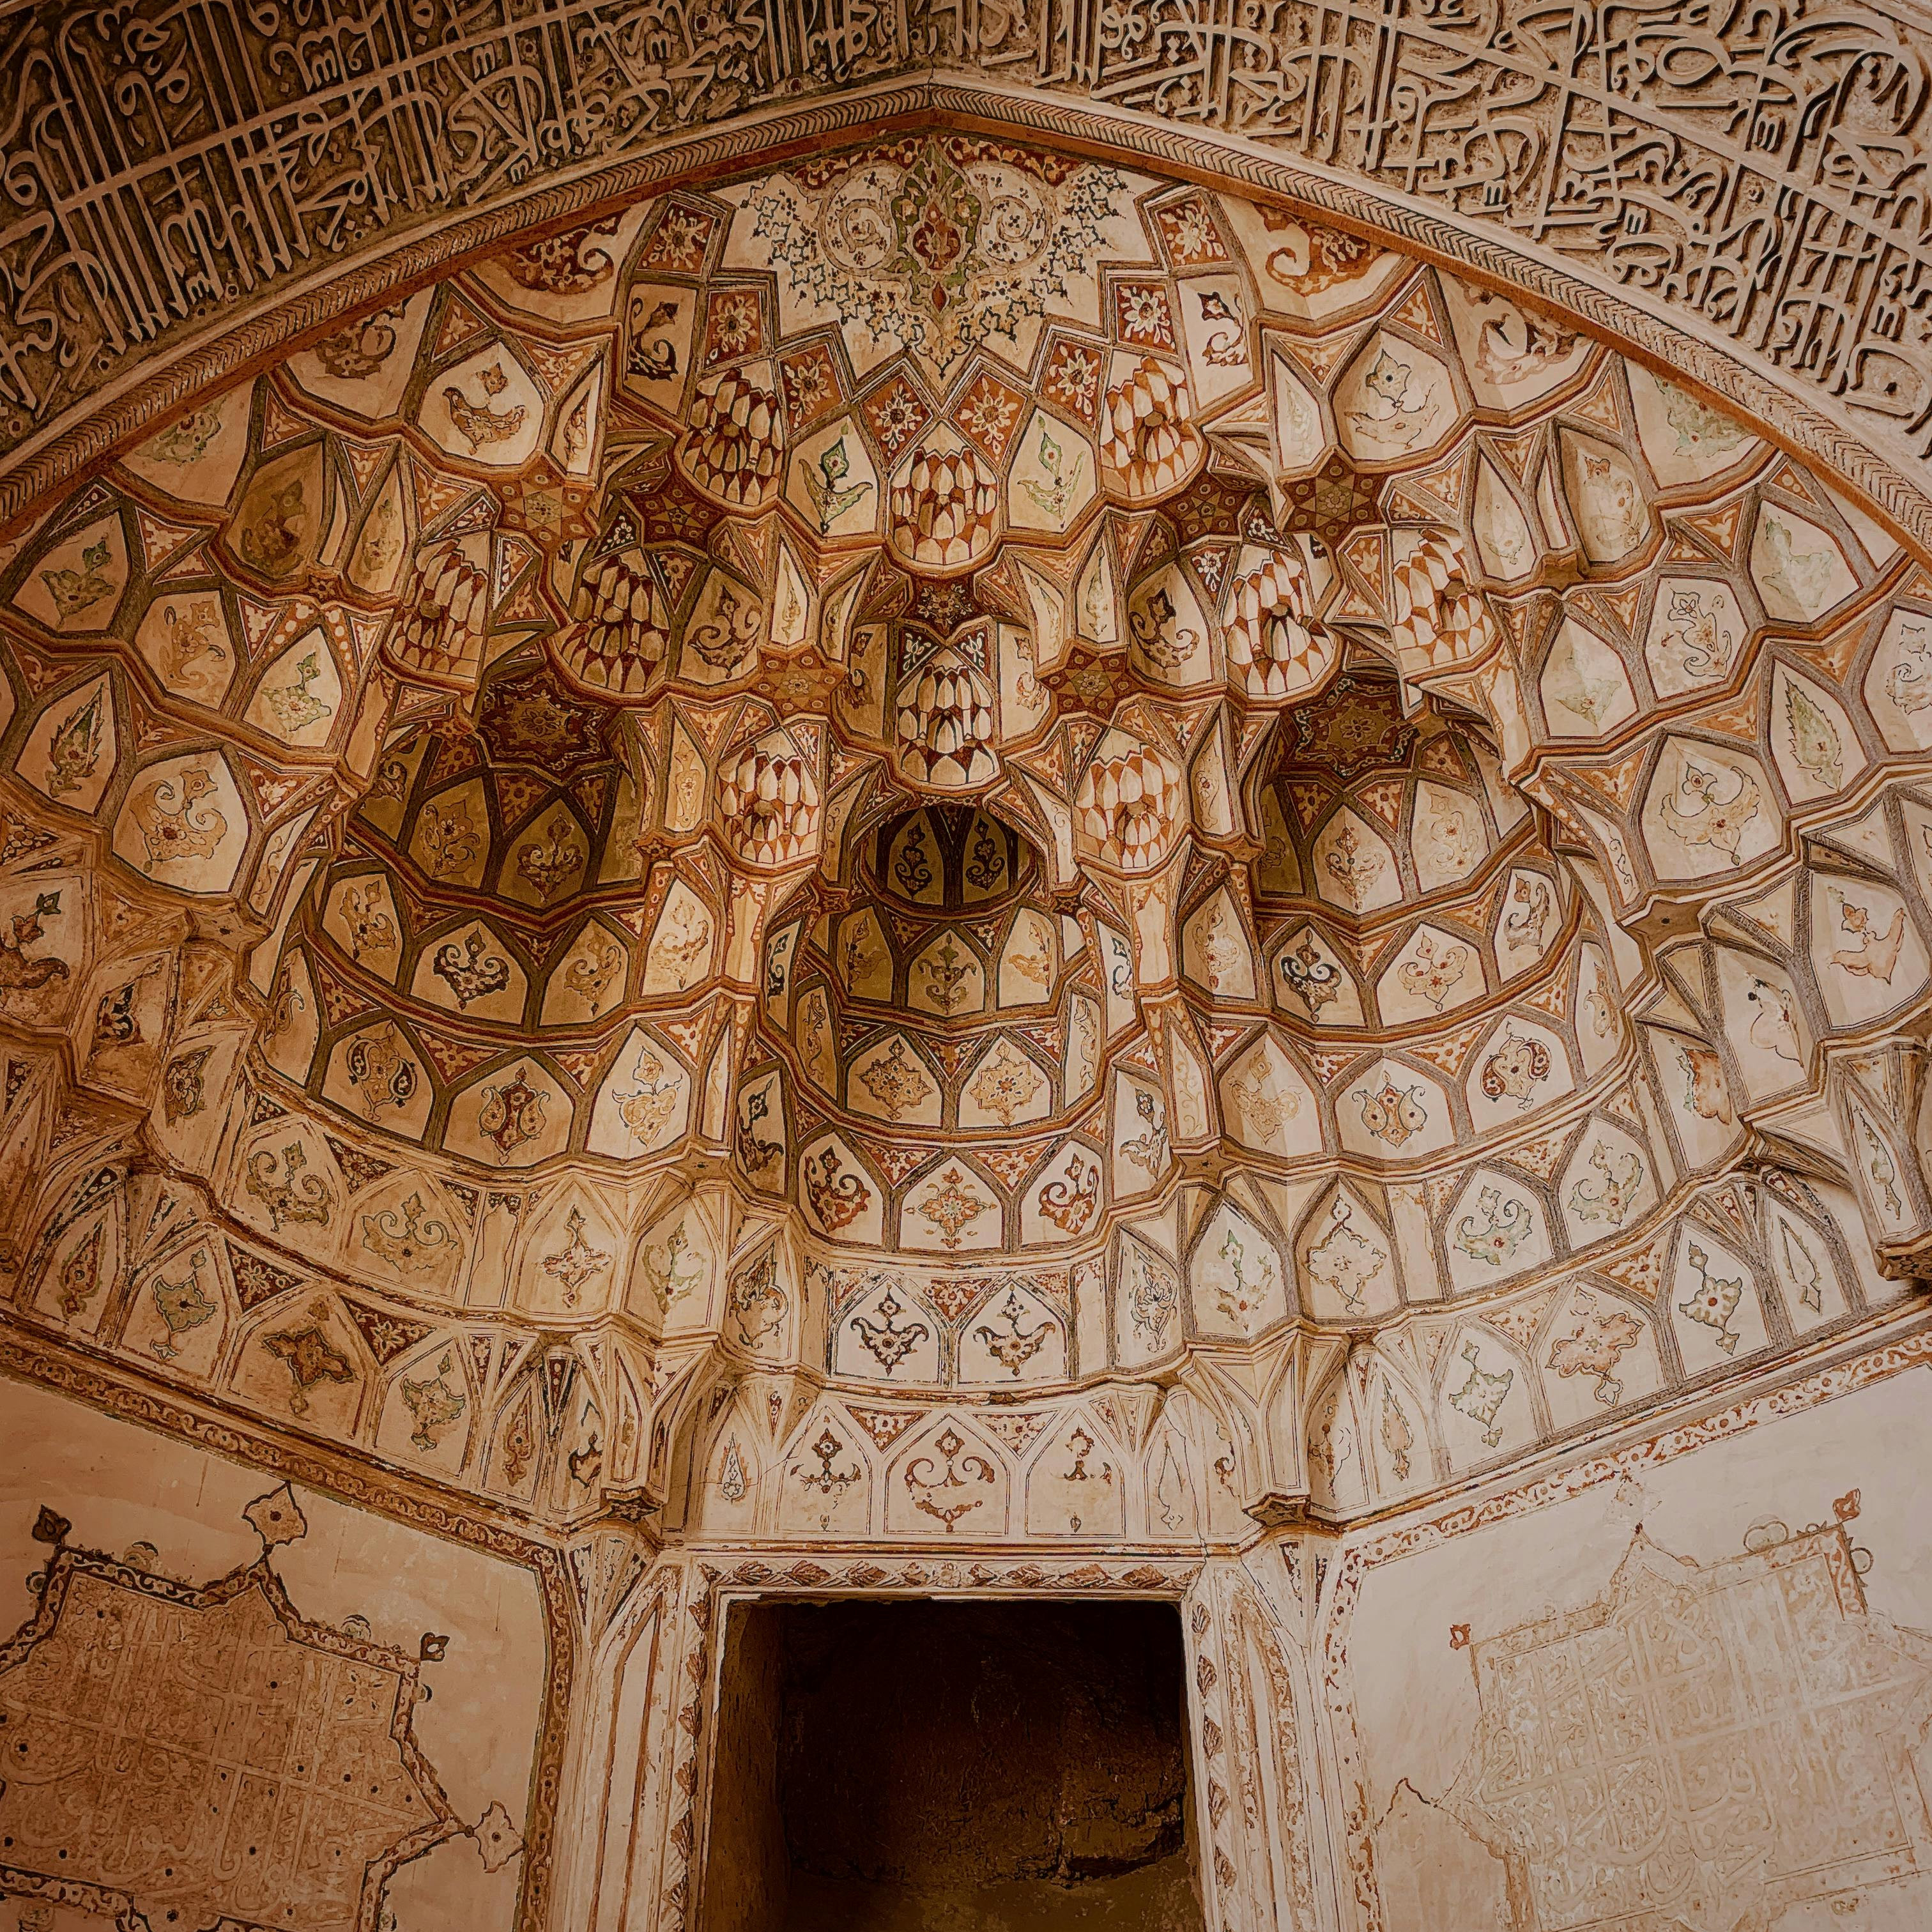 A photo of an intricately decorated ancient wall with intricate patterns and calligraphy